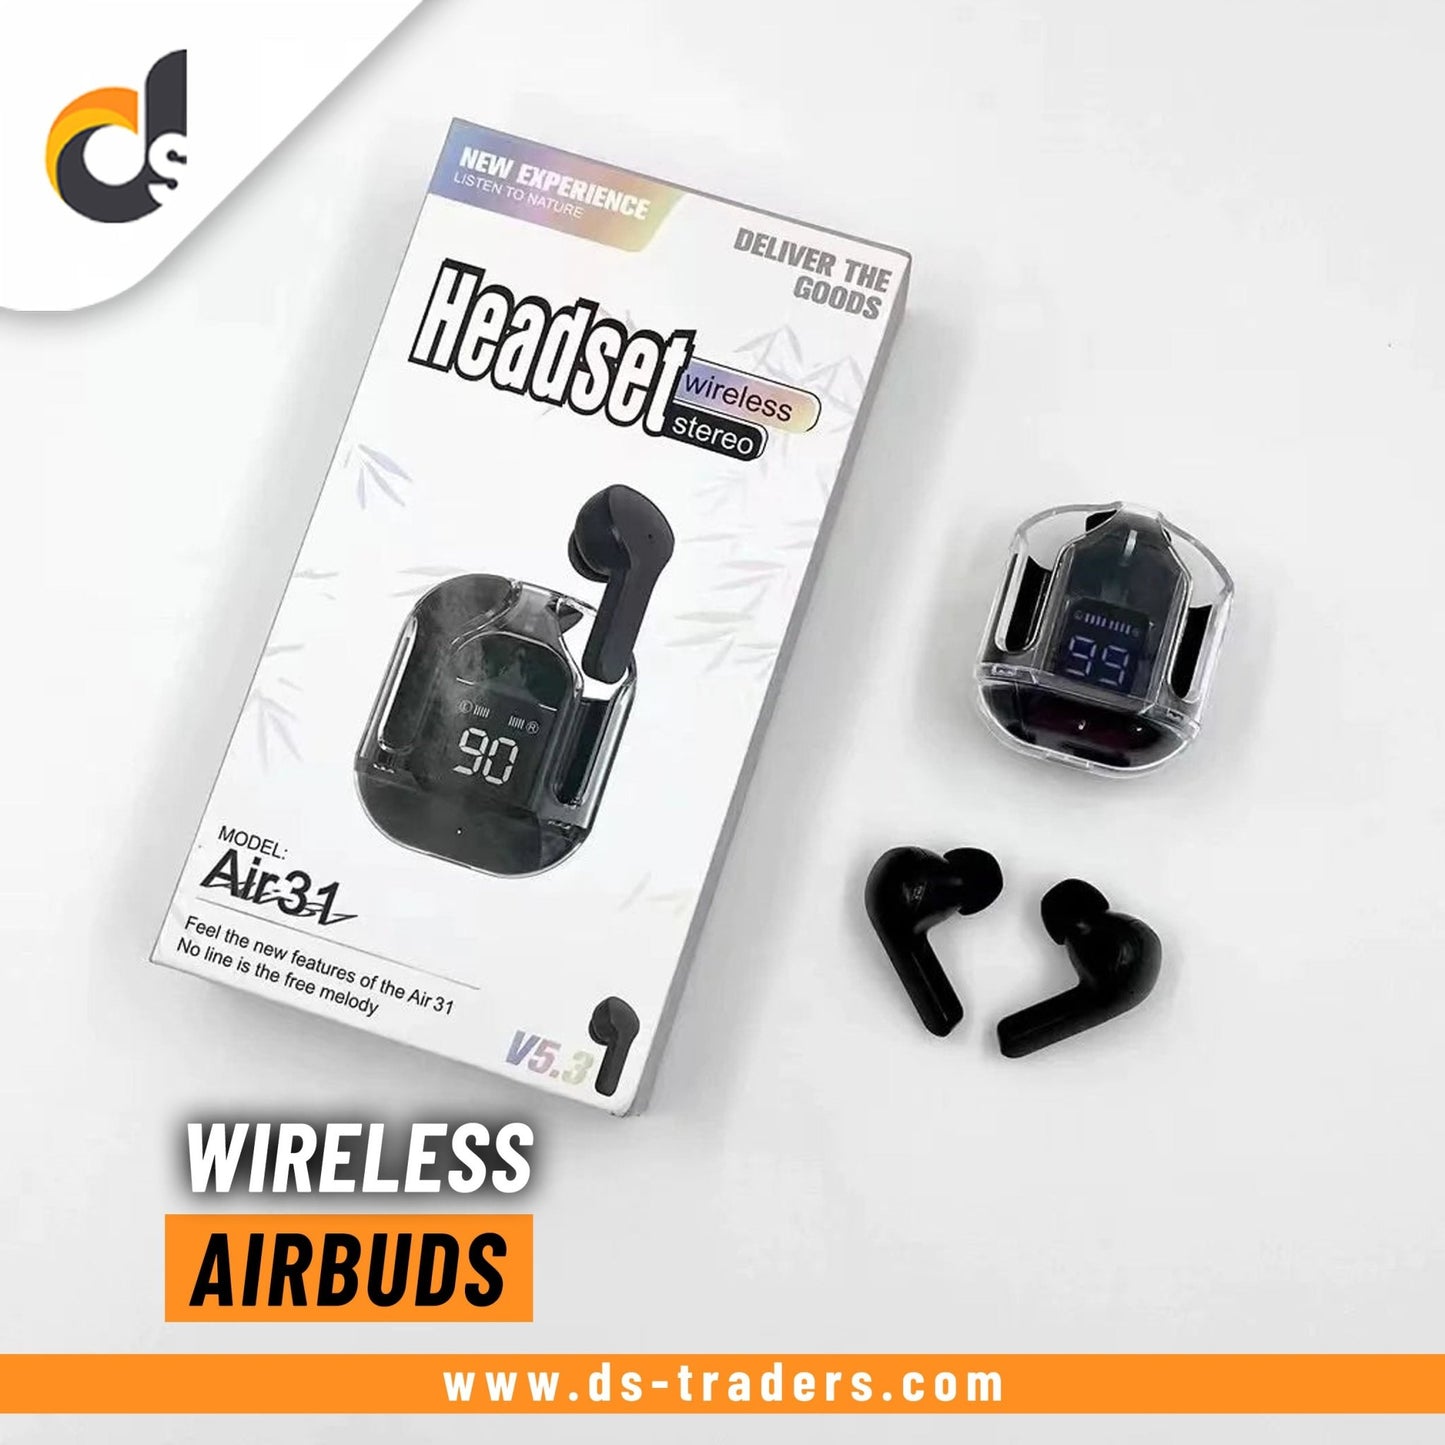 Air-31 Wireless Earbuds - DS Traders